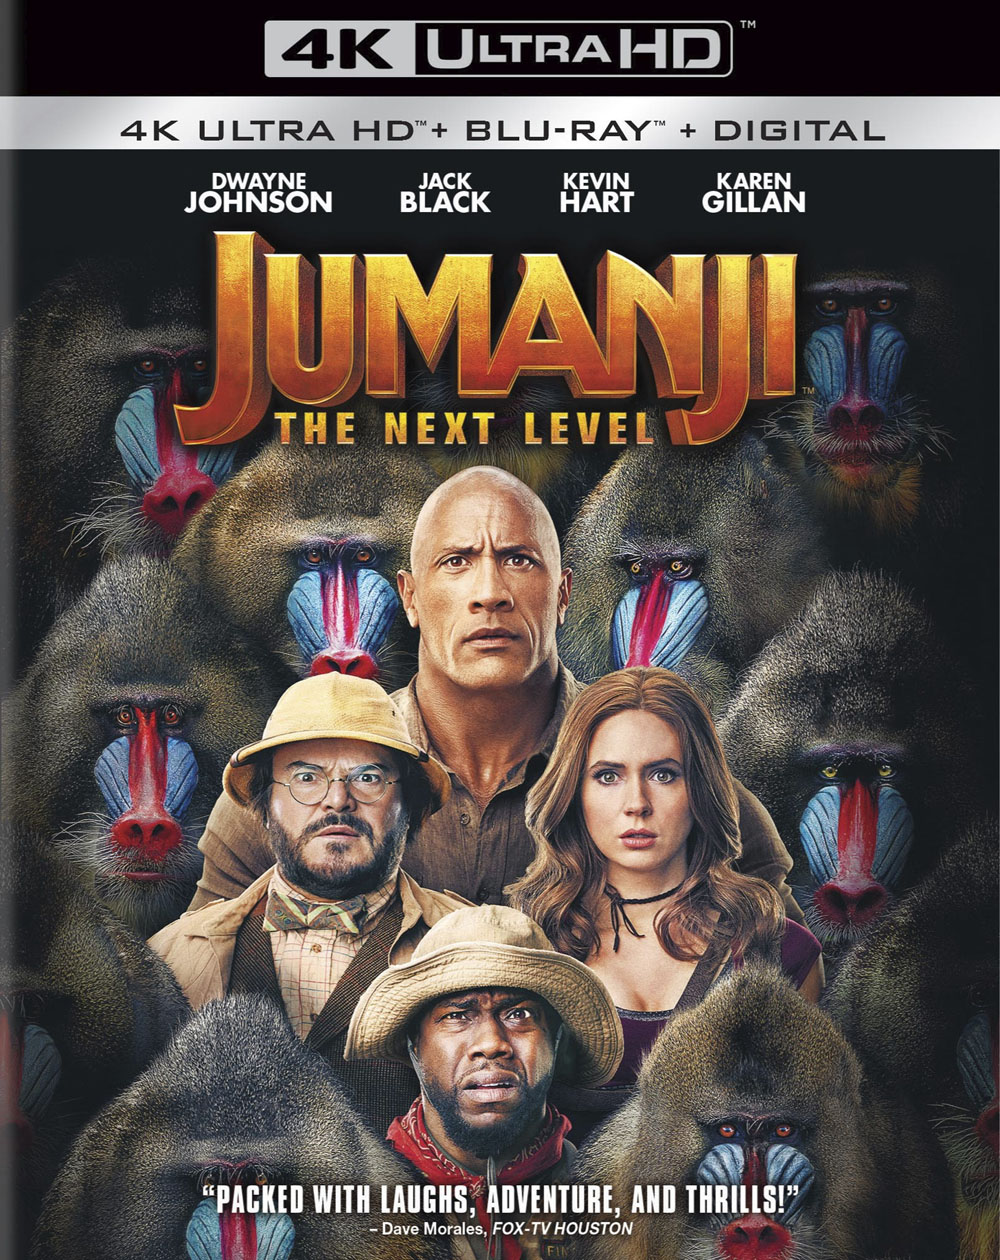 JUMANJI: THE NEXT LEVEL Arrives on Digital March 3 and 4K Ultra HD™, Blu-ray™ & DVD March 17